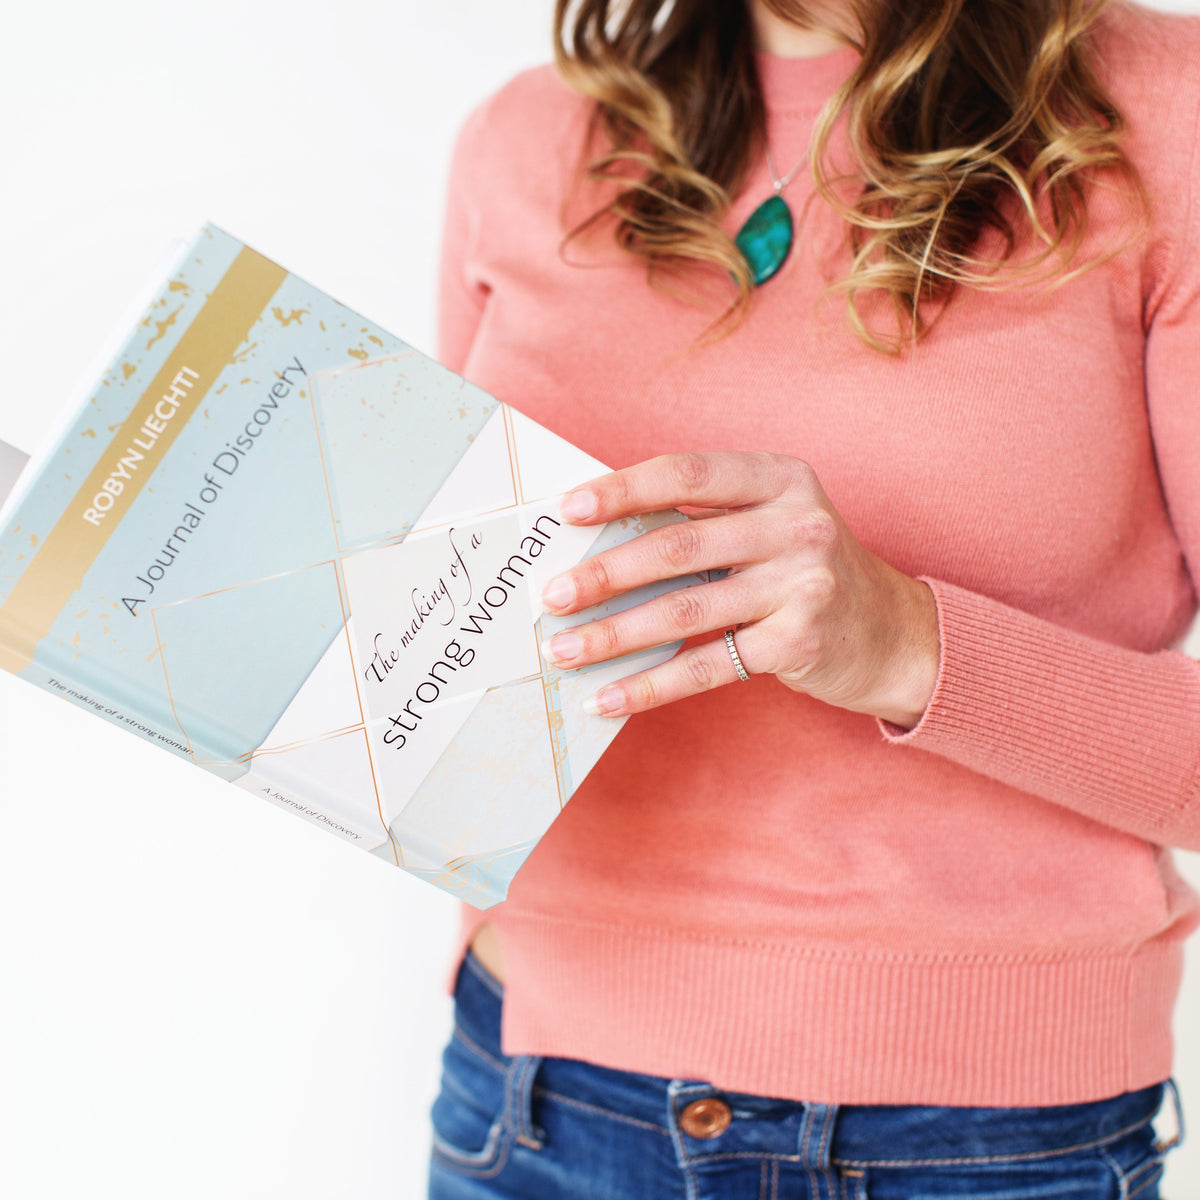 The Making of a Strong Woman  Self-Care Journal – Guided Journals